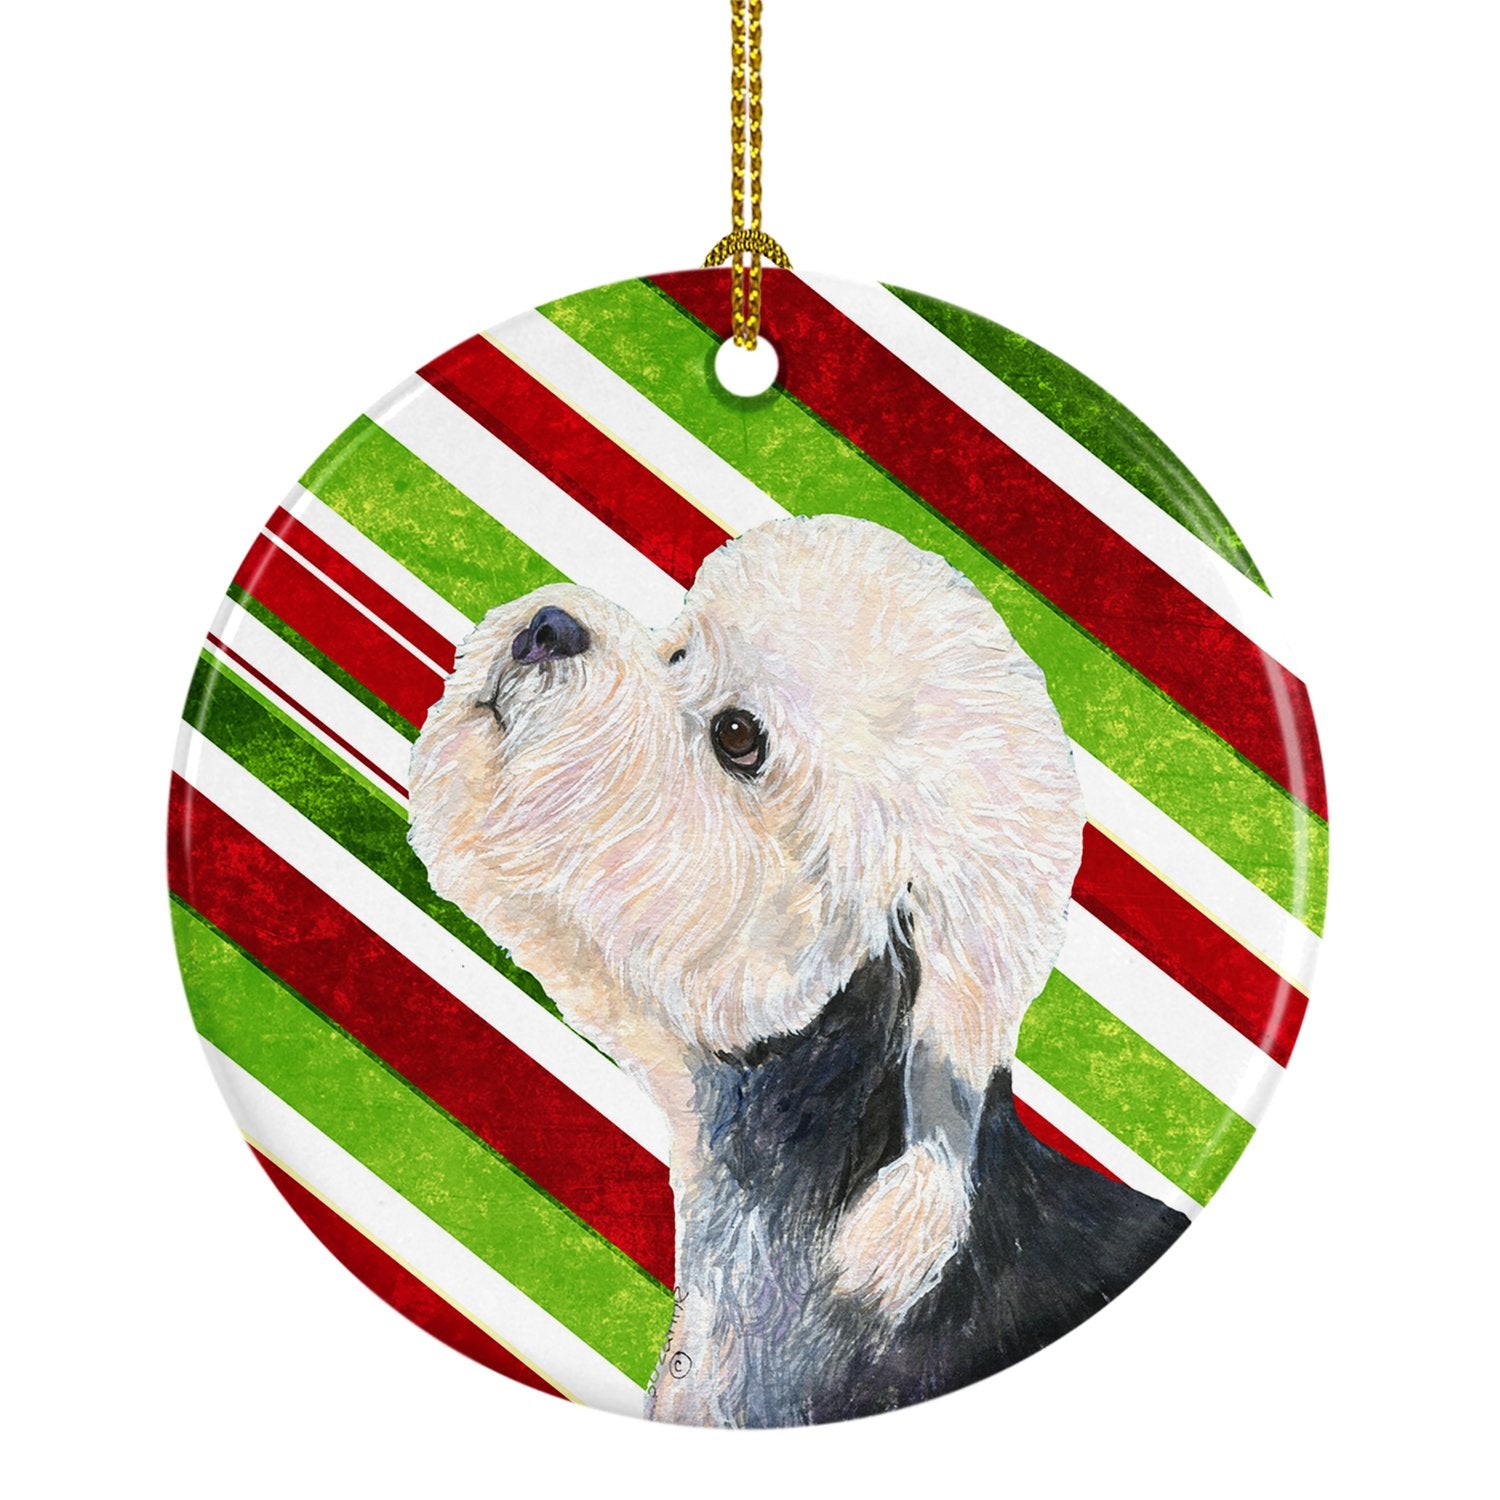 Dandie Dinmont Terrier Candy Cane Holiday Christmas Ceramic Ornament SS4572 by Caroline's Treasures